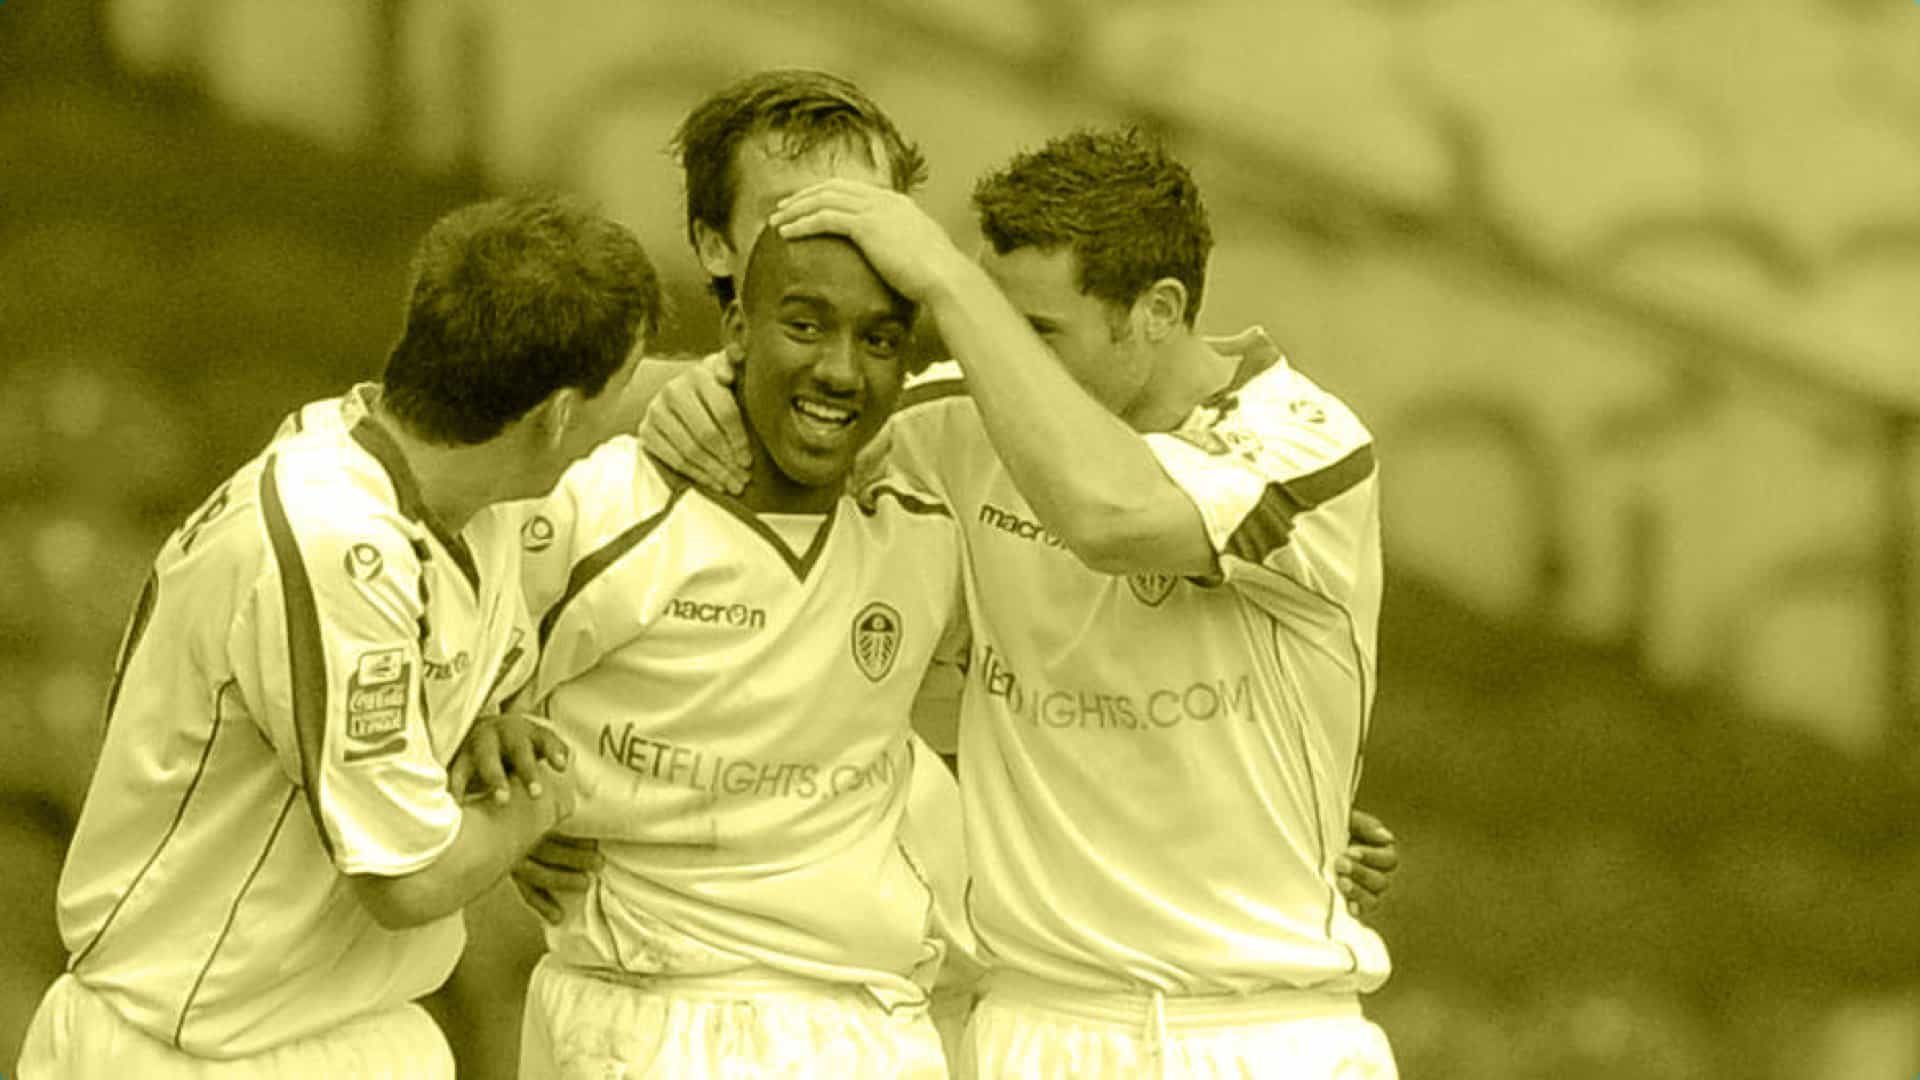 Fabian Delph celebrating scoring for Leeds United in League One with players he was much better than